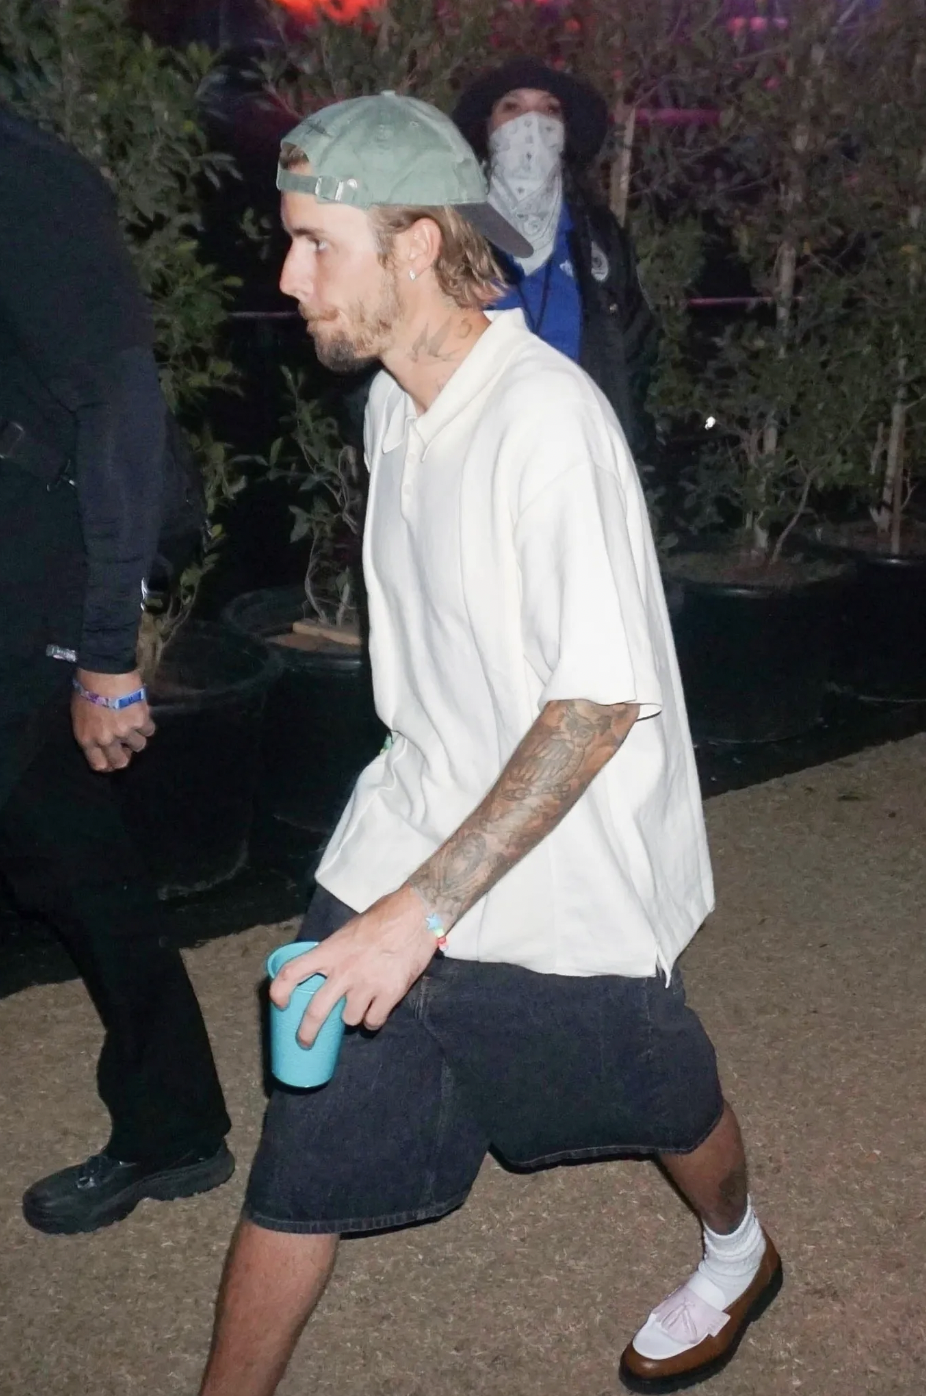 Earlier that day, Justin, 30, was seen walking alone on the festival grounds. (Image courtesy: Backgrid)